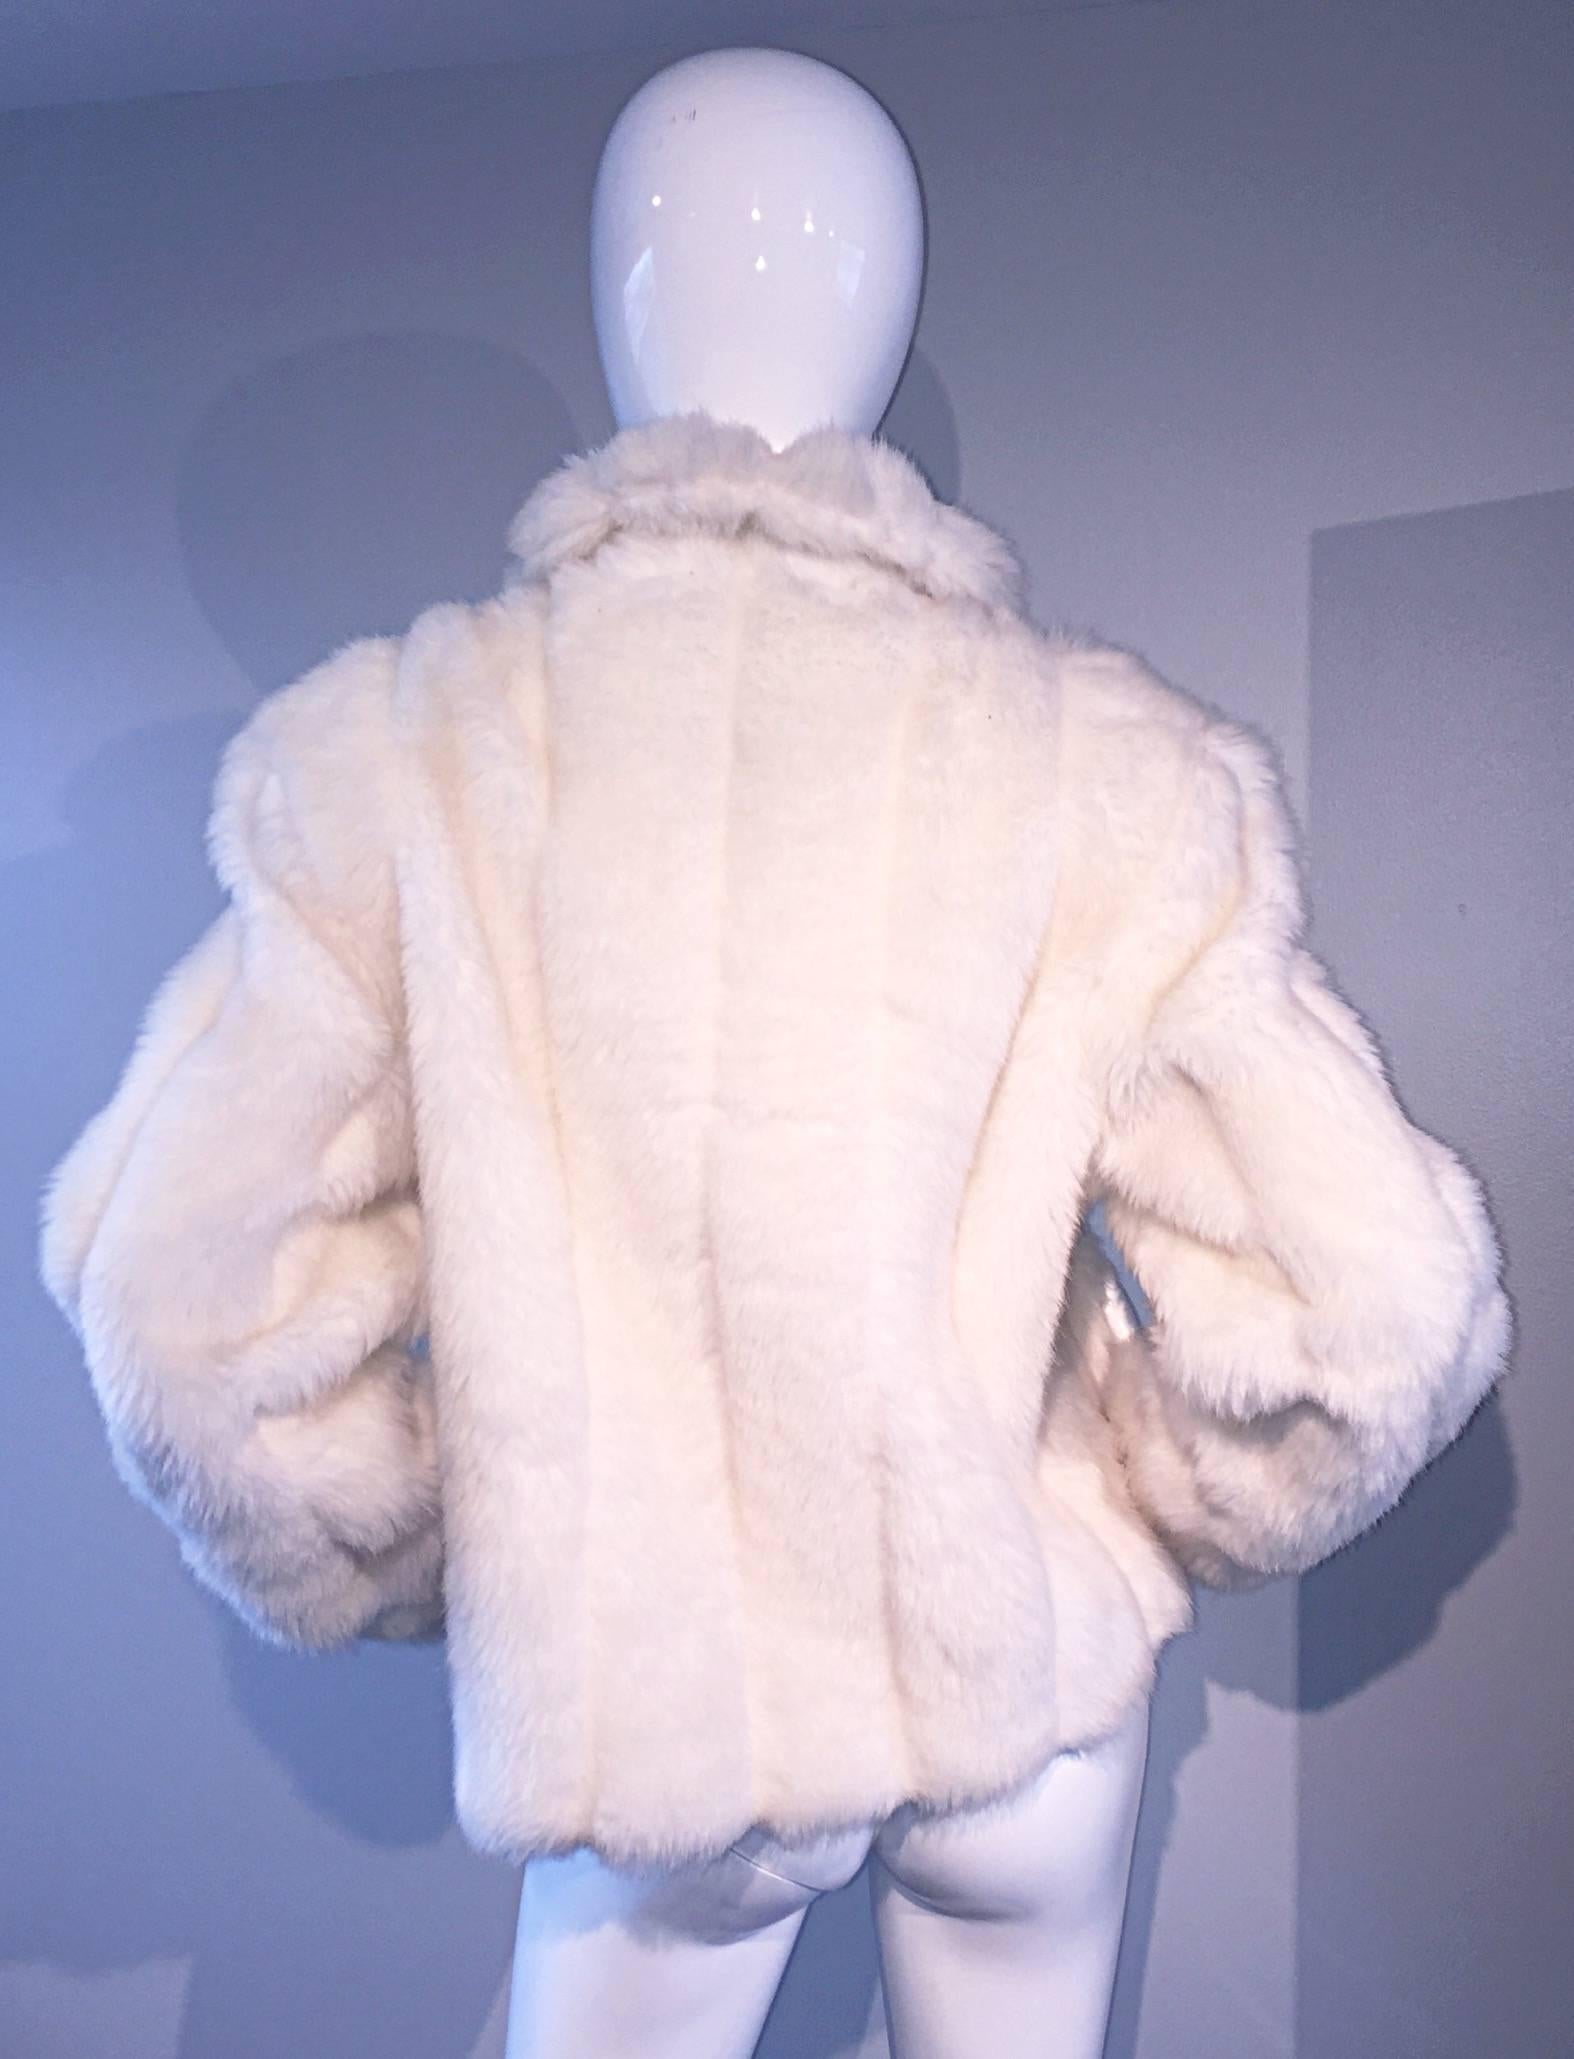 Amazing vintage OLEG CASSINI faux fur white jacket! So much style is exuded from this lovely coat! Zips up the bodice, with pom poms at both sides of the collar. Features pockets at both sides of the waist. Extremely comfortable, and keeps you very